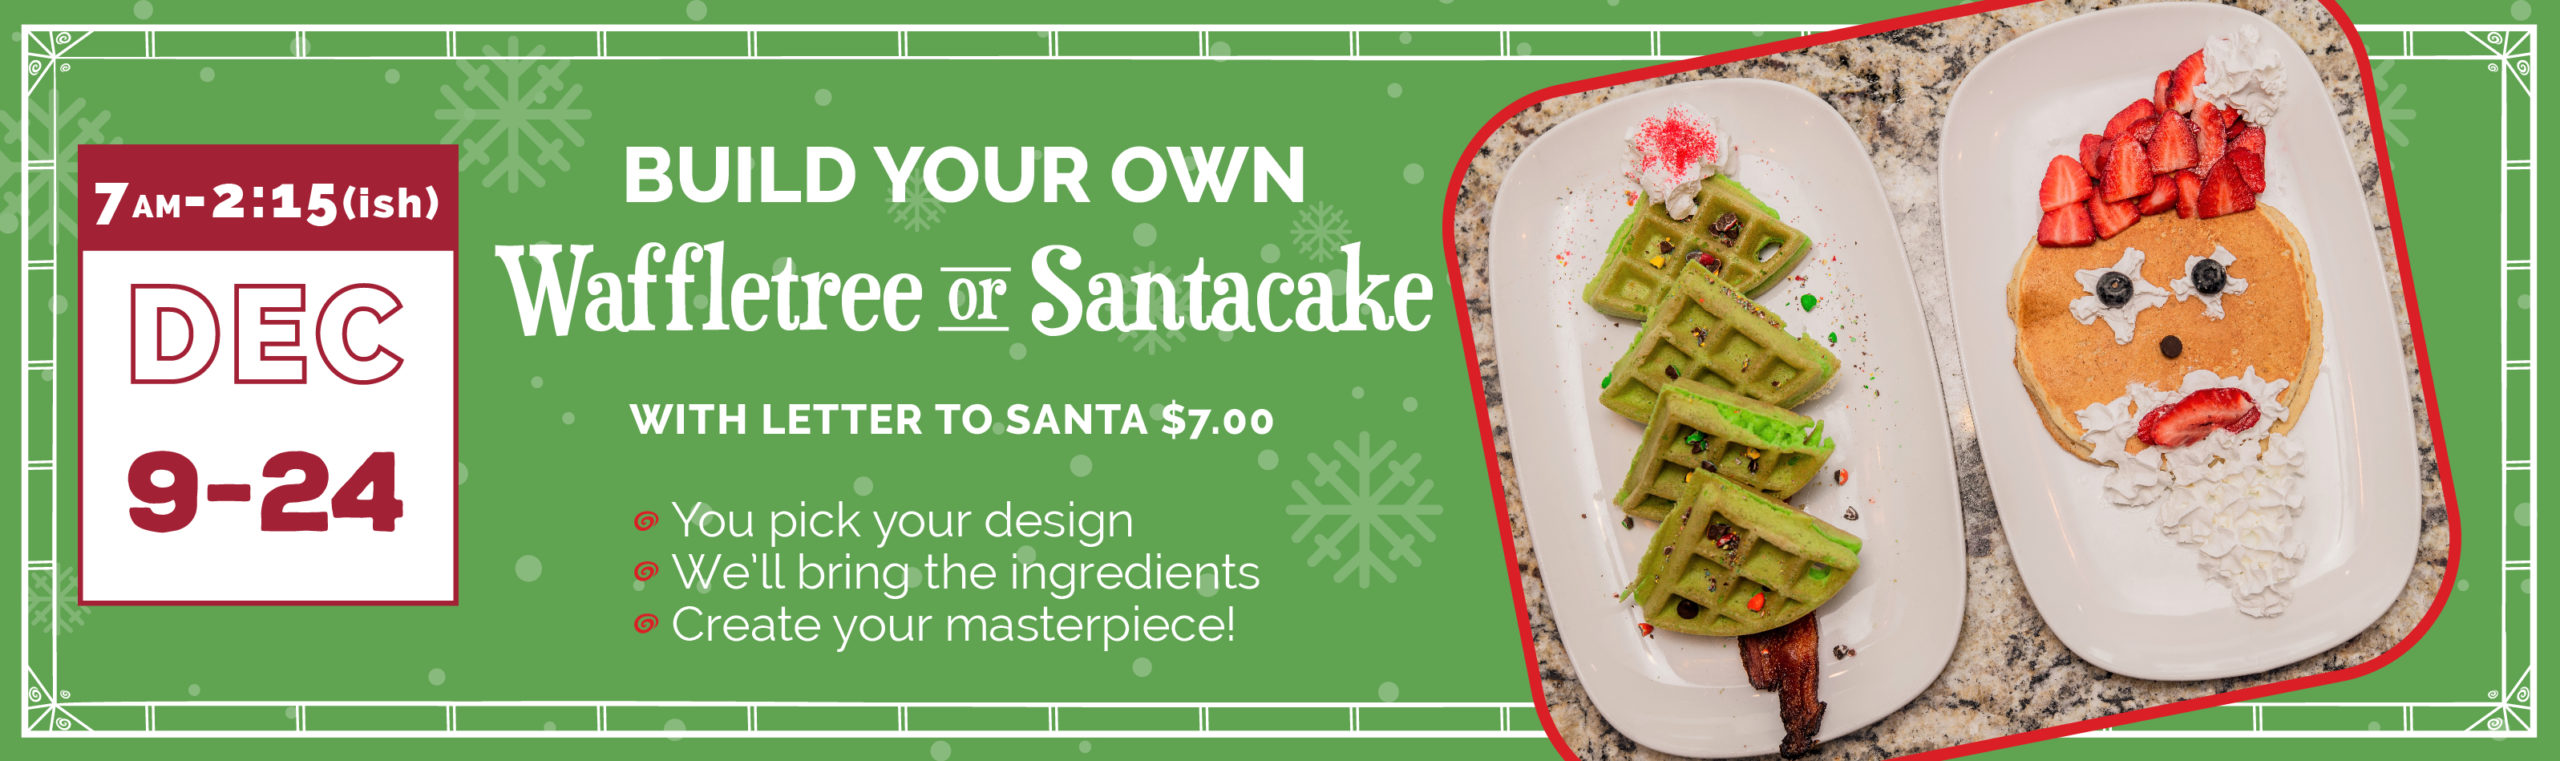 Build your own Waffle Tree and Santacake